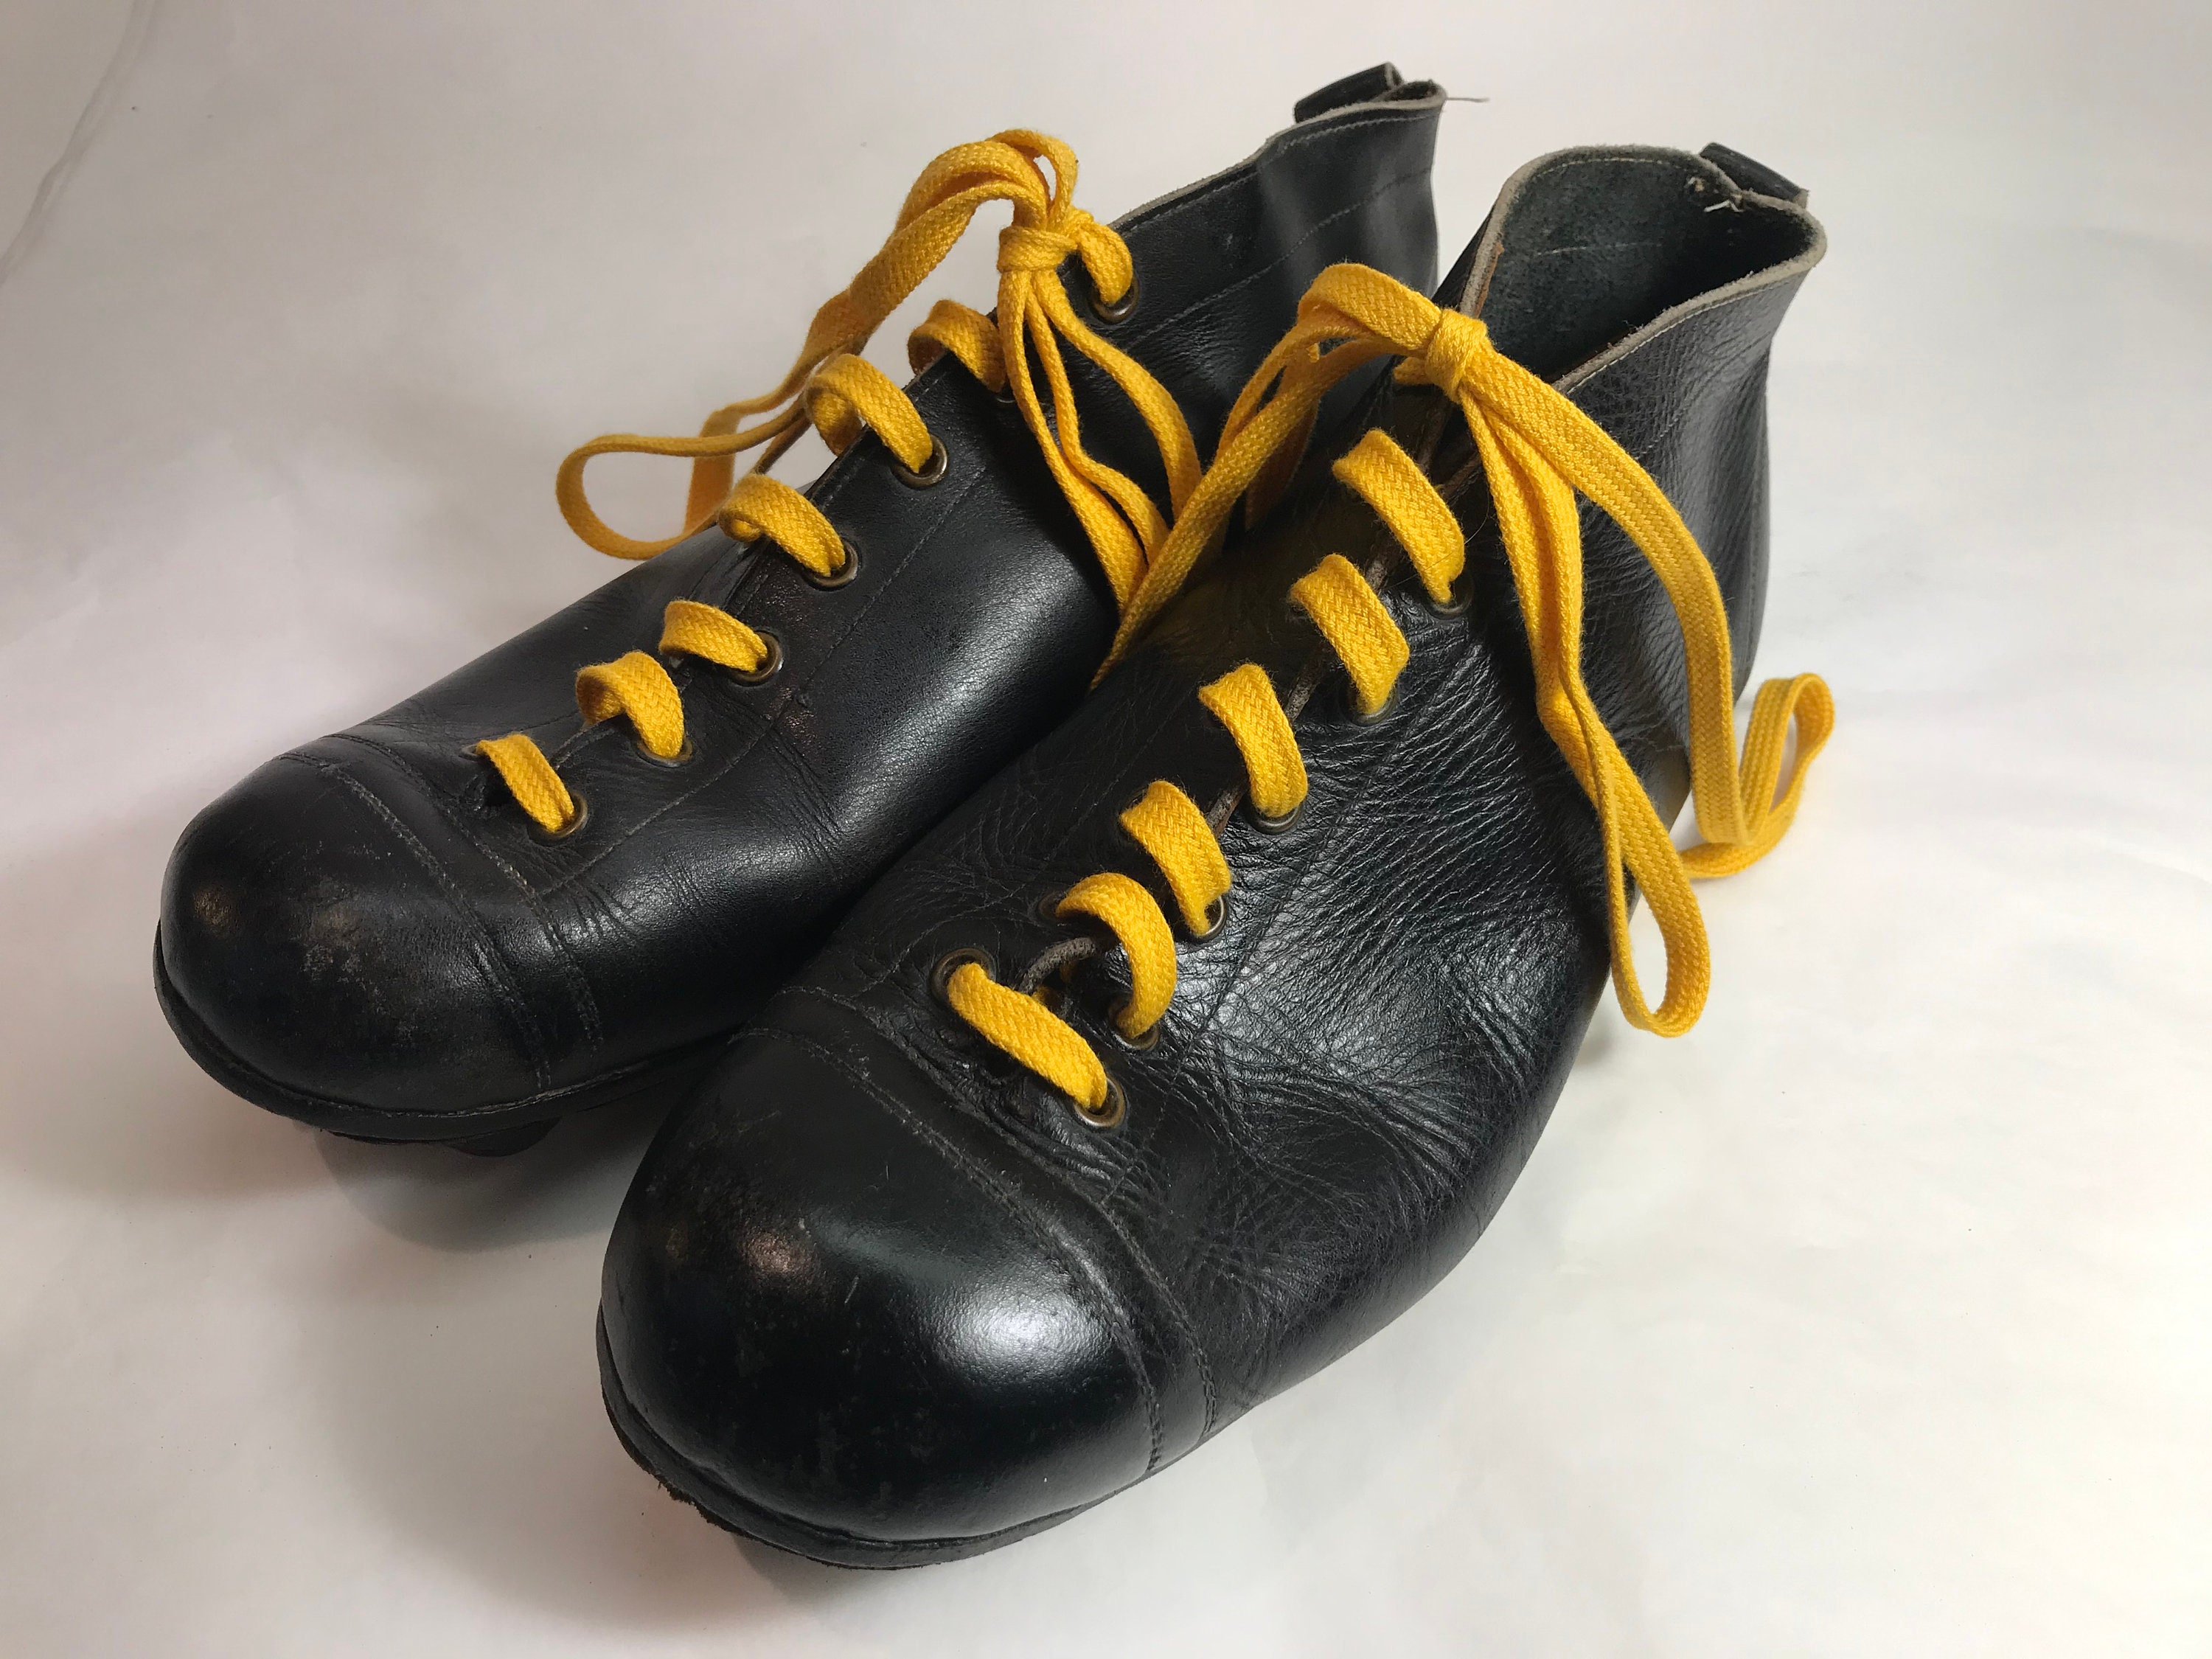 Olympia Vintage Football Cleats 1950s Football Boots in 